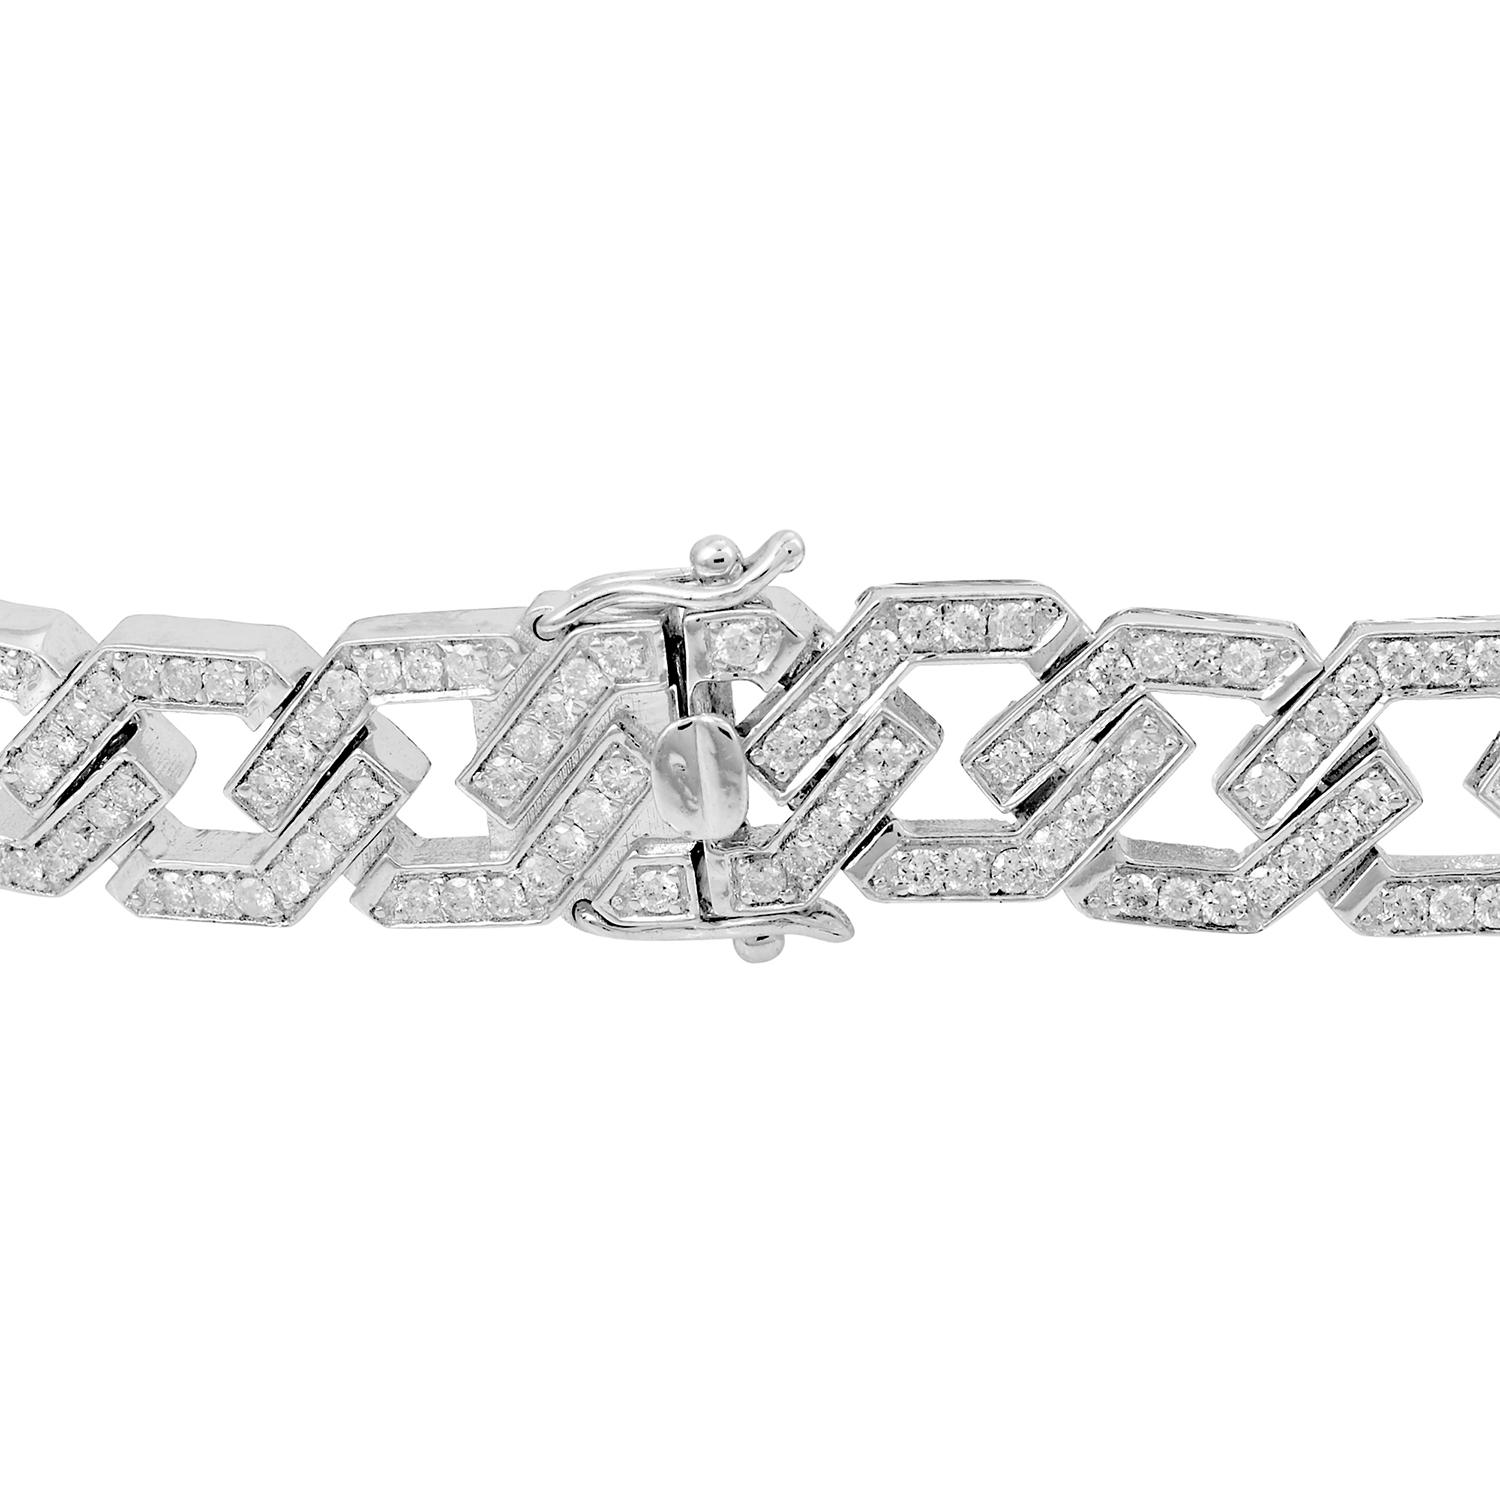 Item Code :- CN-25593 (14k)
Gross Wt. :- 16.93 gm
14k Solid White Gold Wt. :- 16.31 gm
Natural Diamond Wt. :- 3.10 Ct. ( AVERAGE DIAMOND CLARITY SI1-SI2 & COLOR H-I )
Bracelet Size :- 7 Inch

✦ Sizing
.....................
We can adjust most items